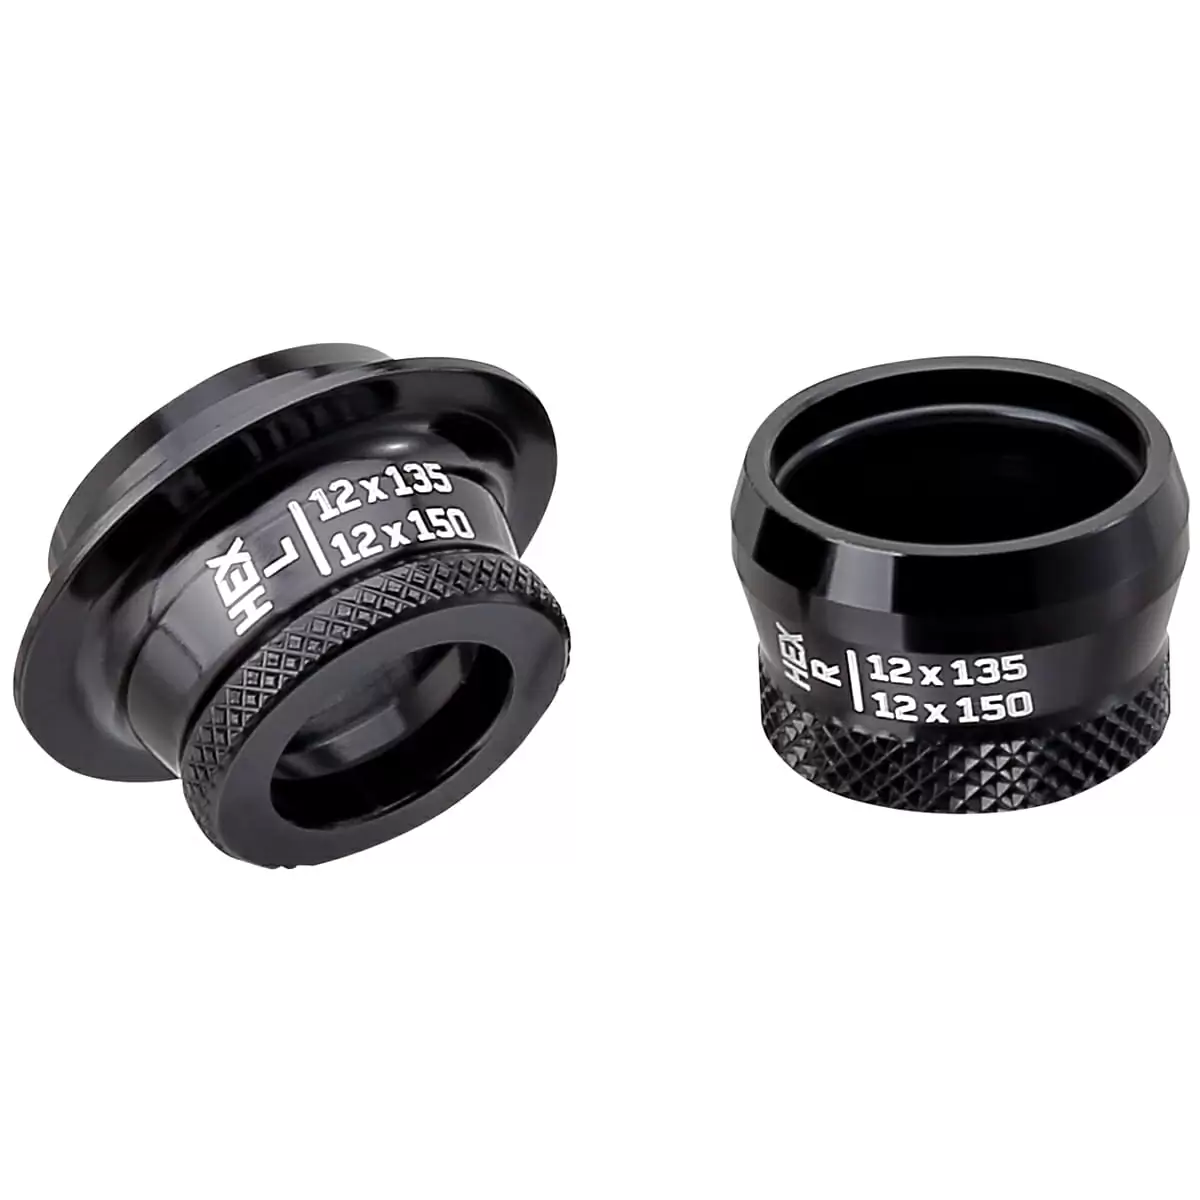 Hex rear hub adapter for conversion to standard 12x135mm and 12x150mm - image